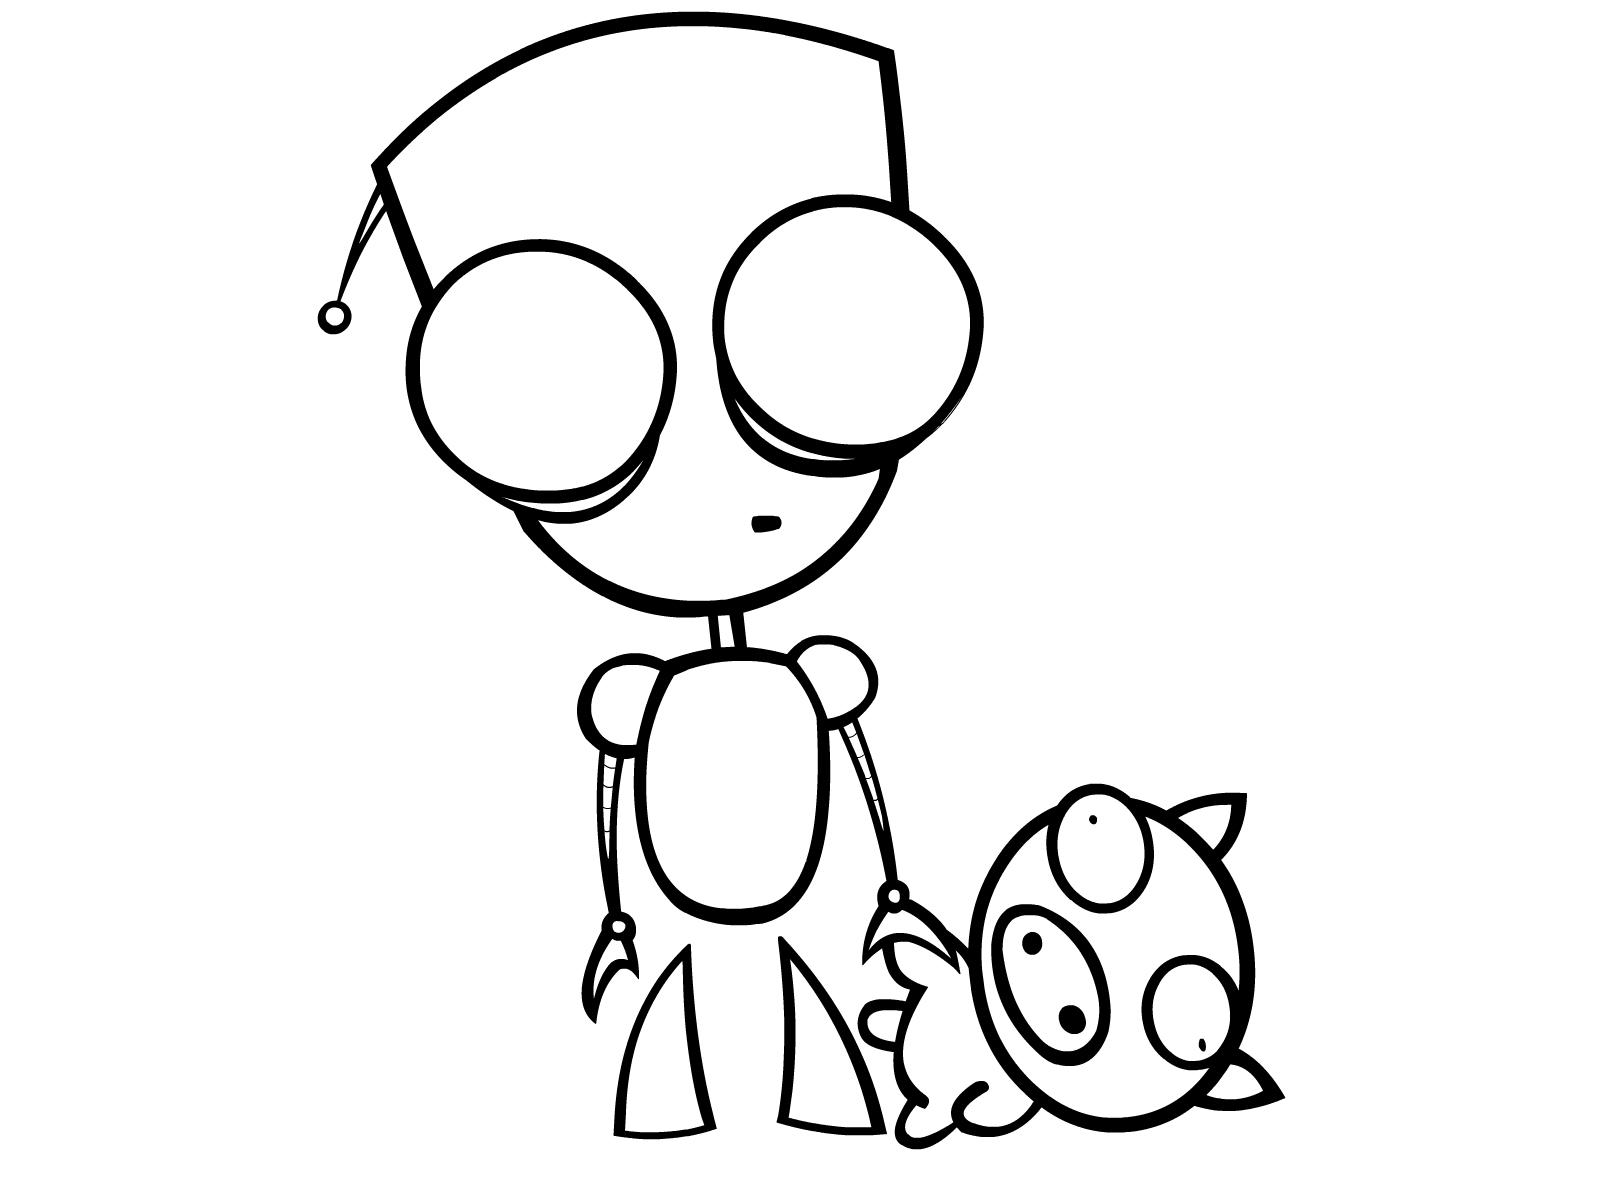 Printable GIR Coloring Pages Pdf - Printable Gir Coloring Pages